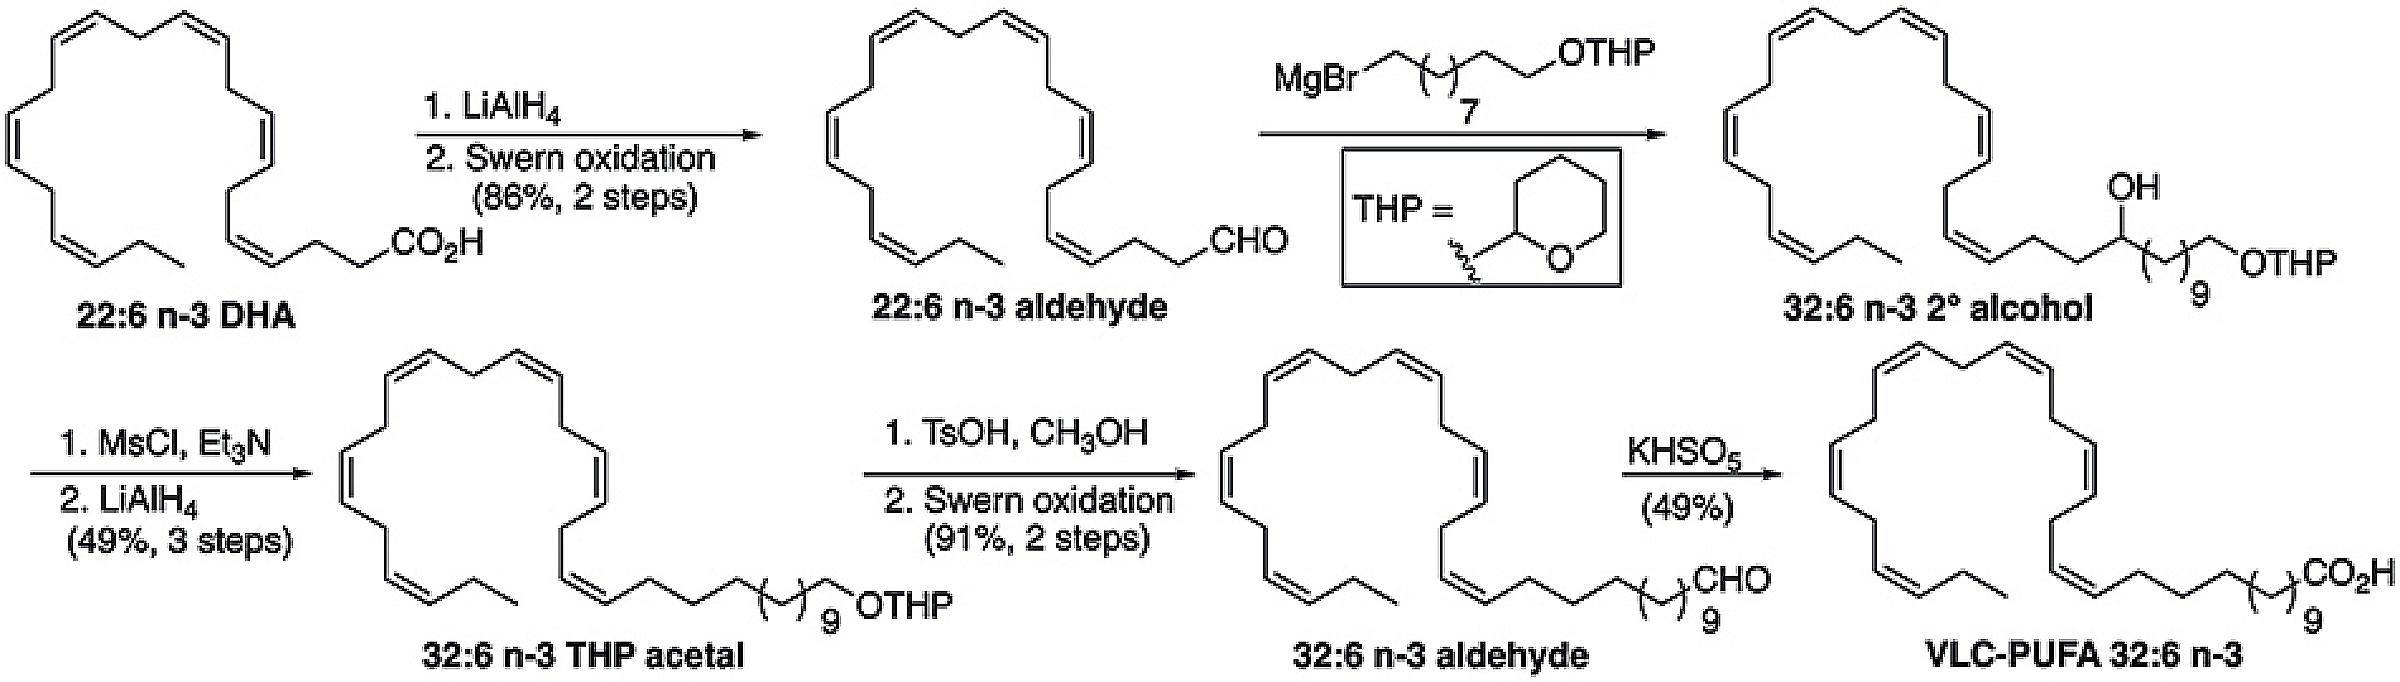 Chemical synthesis of a retina-specific VLC-PUFA (32:6 n-3) from docosahexaenoic acid (DHA).